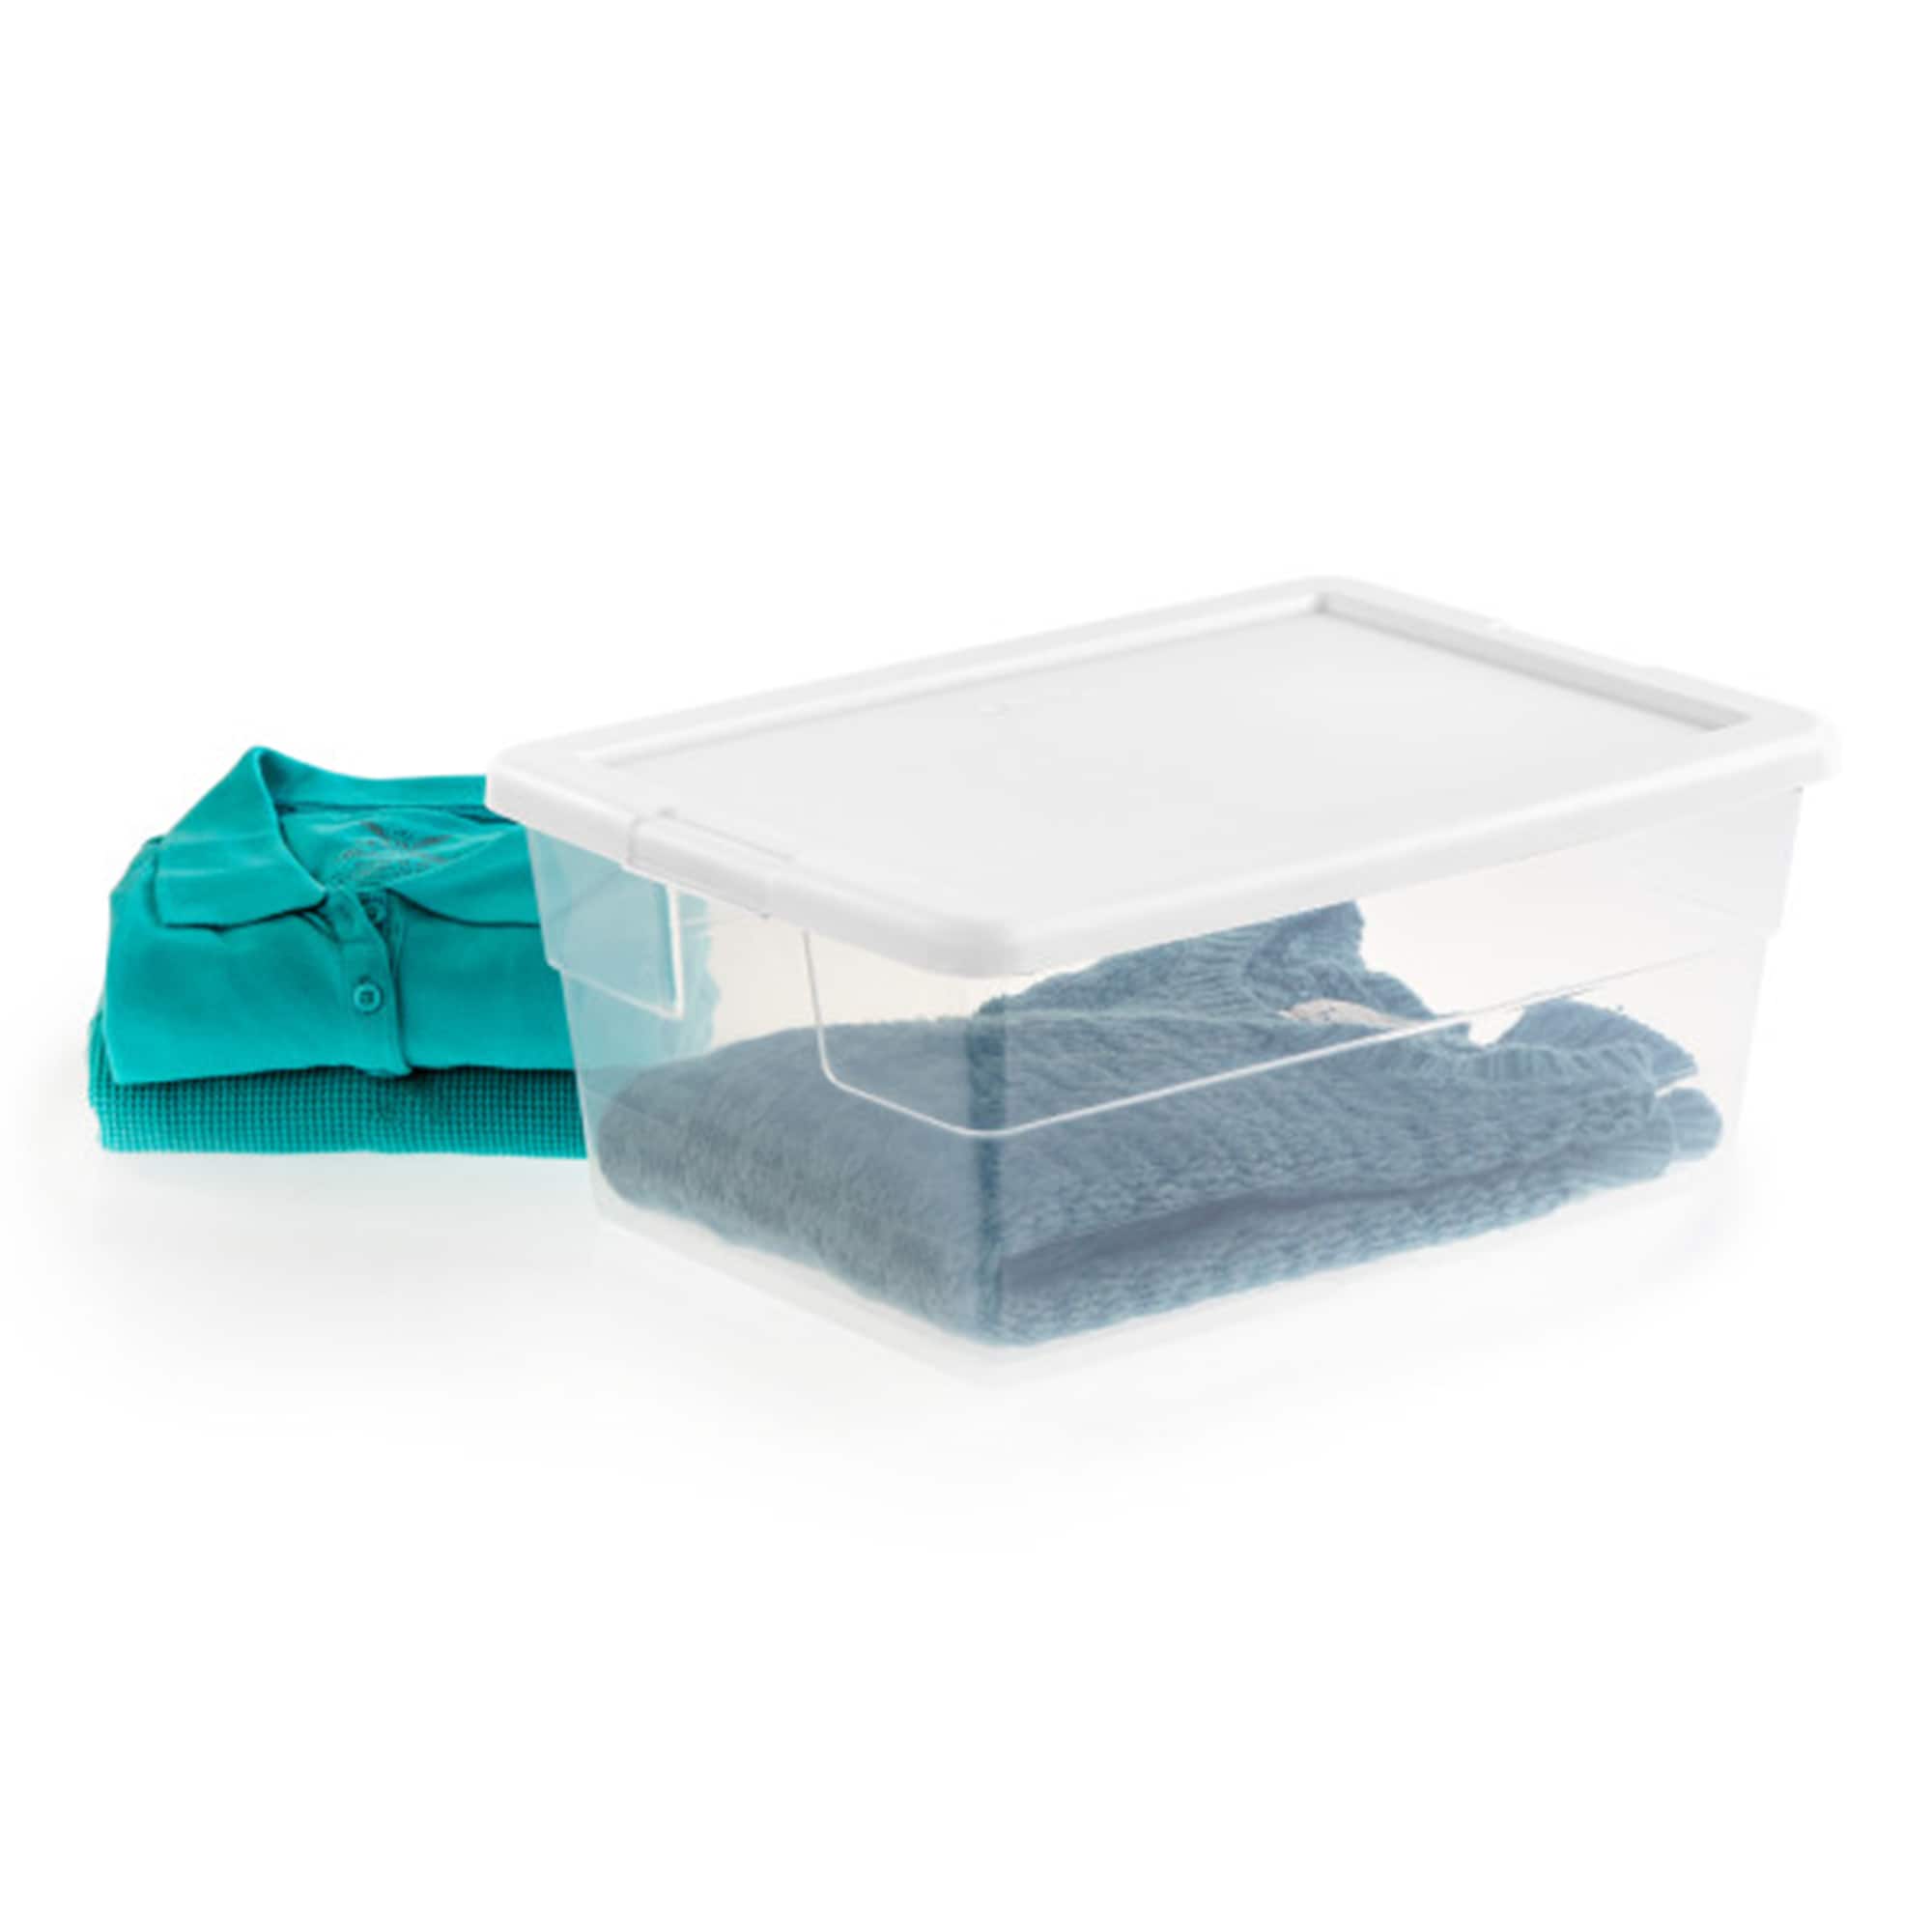 Rubbermaid Servin' Saver Deluxe Ice Cube Tray - Bay Hardware